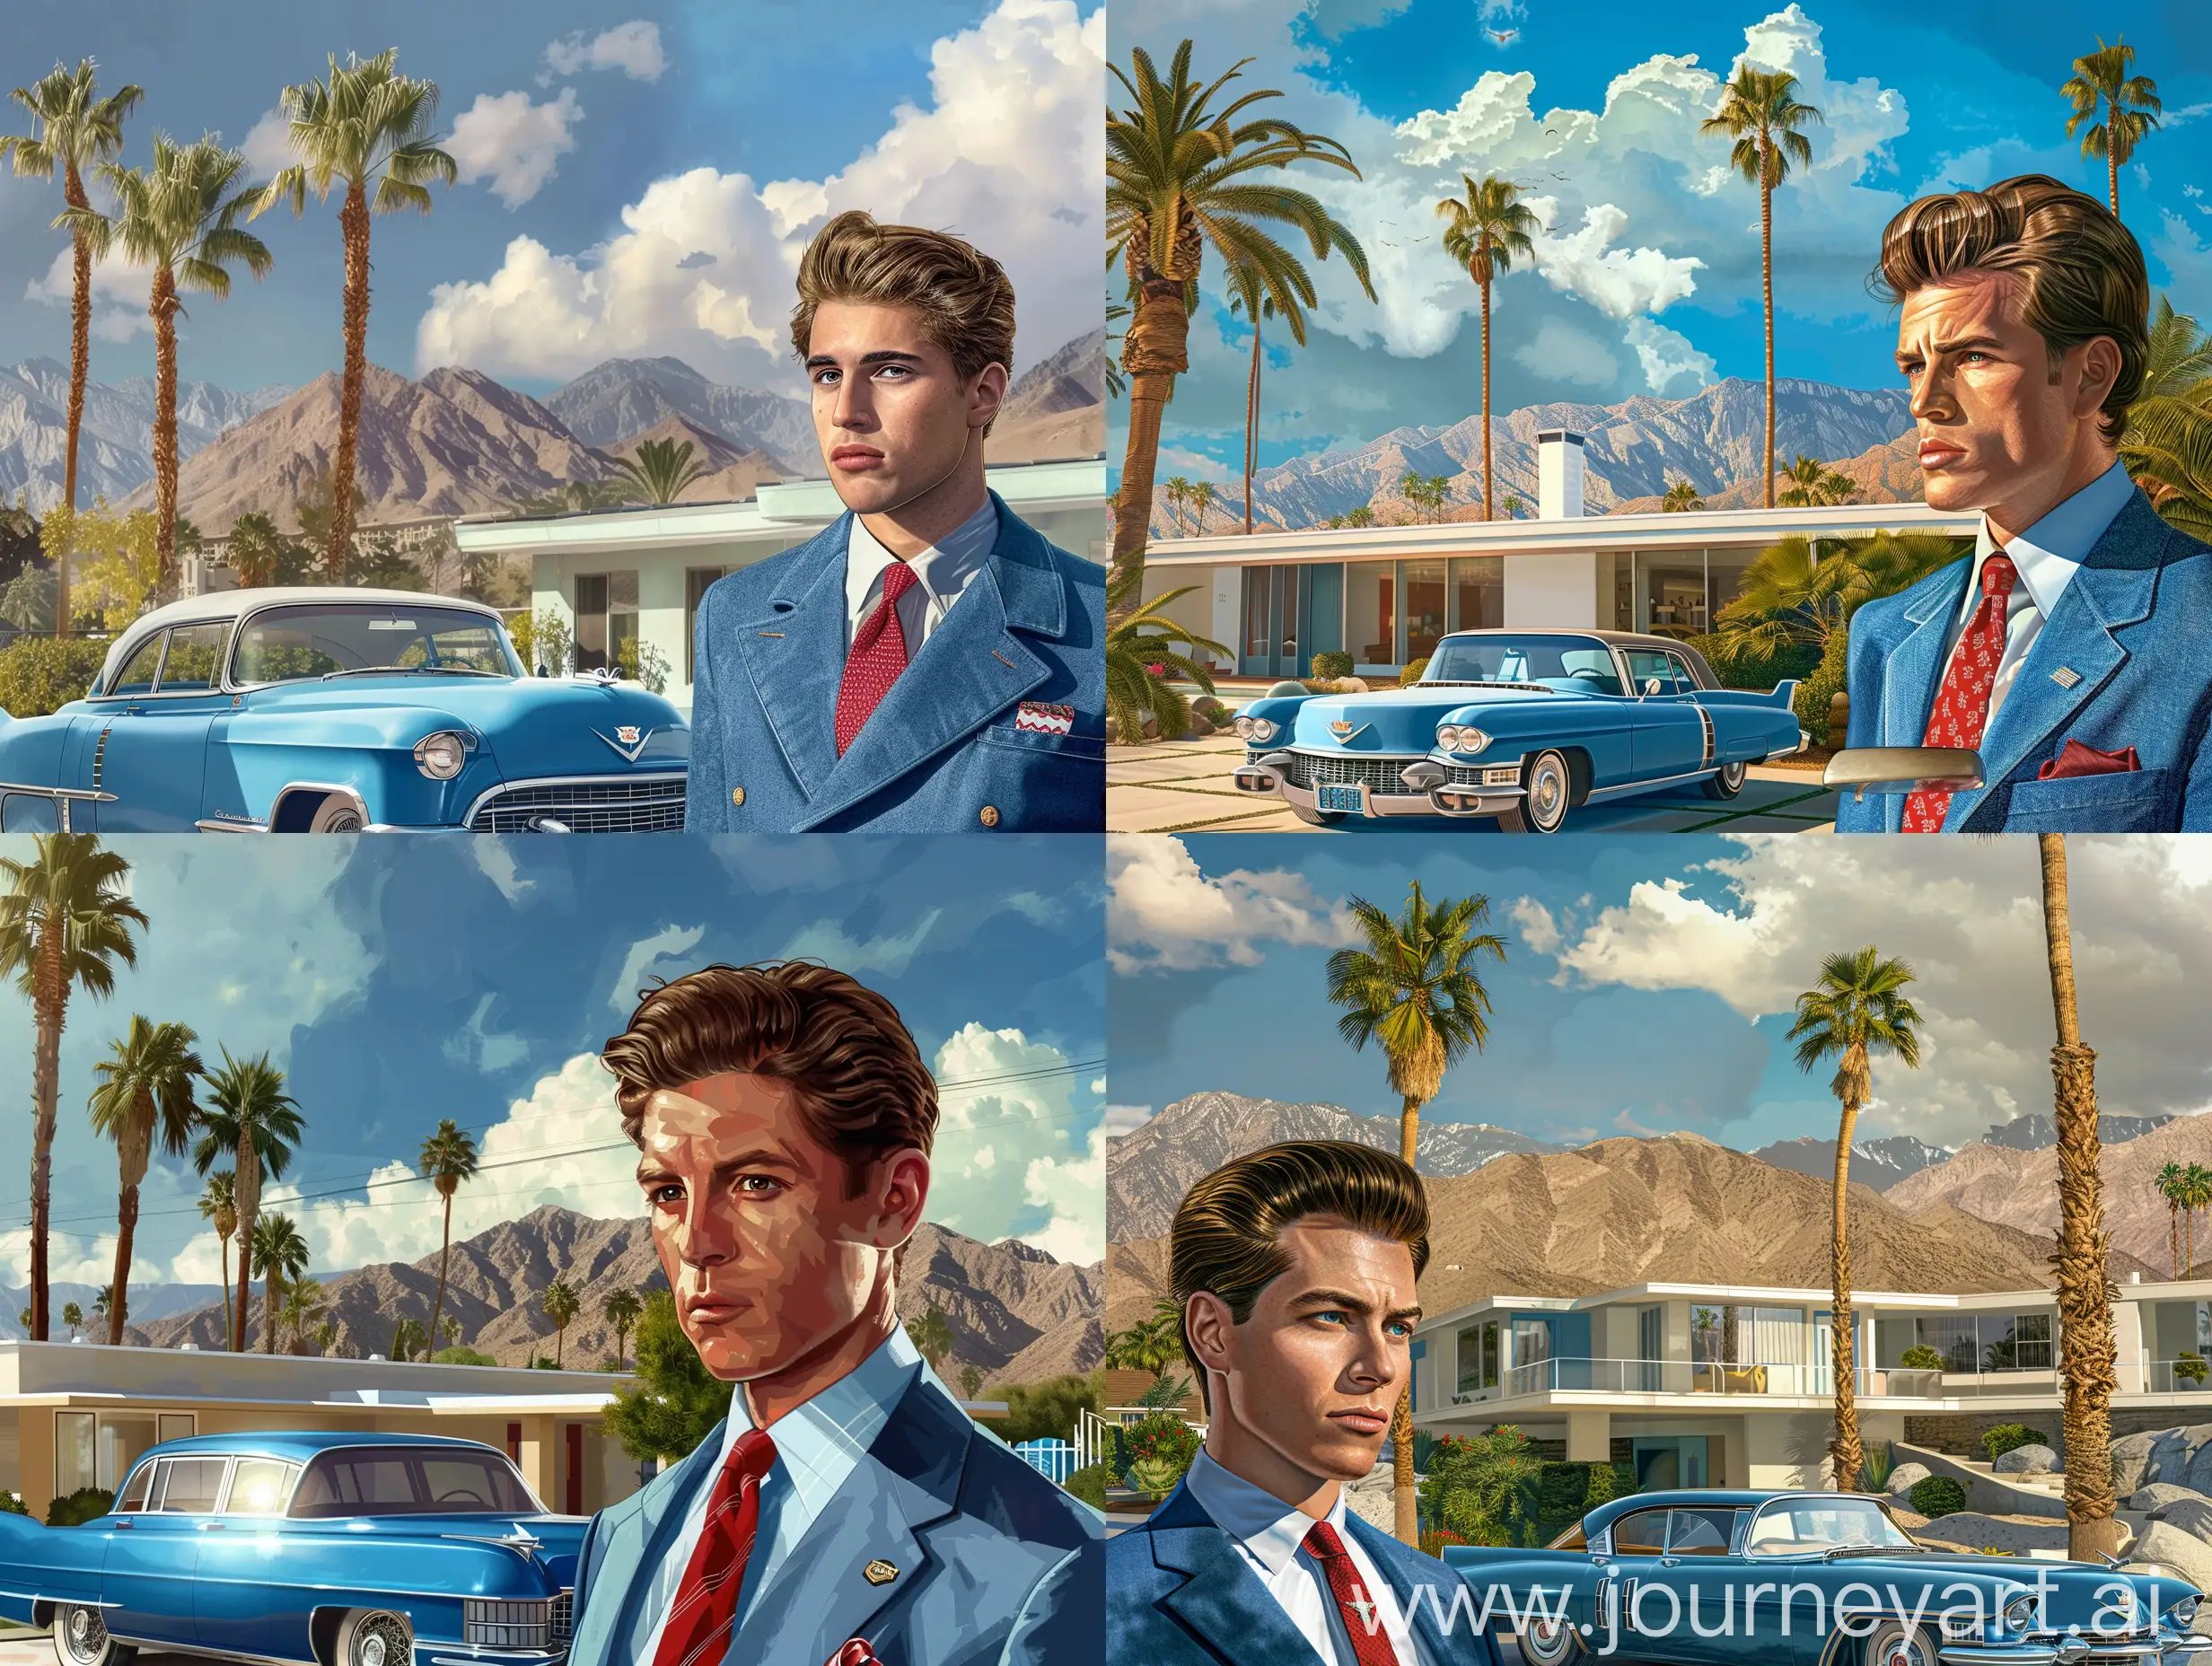 Palm springs midcentury two floors villa palm trees, mountains in the background, late afternoon sunlight, clouds, photorealistic, fifties blue cadillac, fifties american elegant dandy man brown hair, blue jacket, red tie